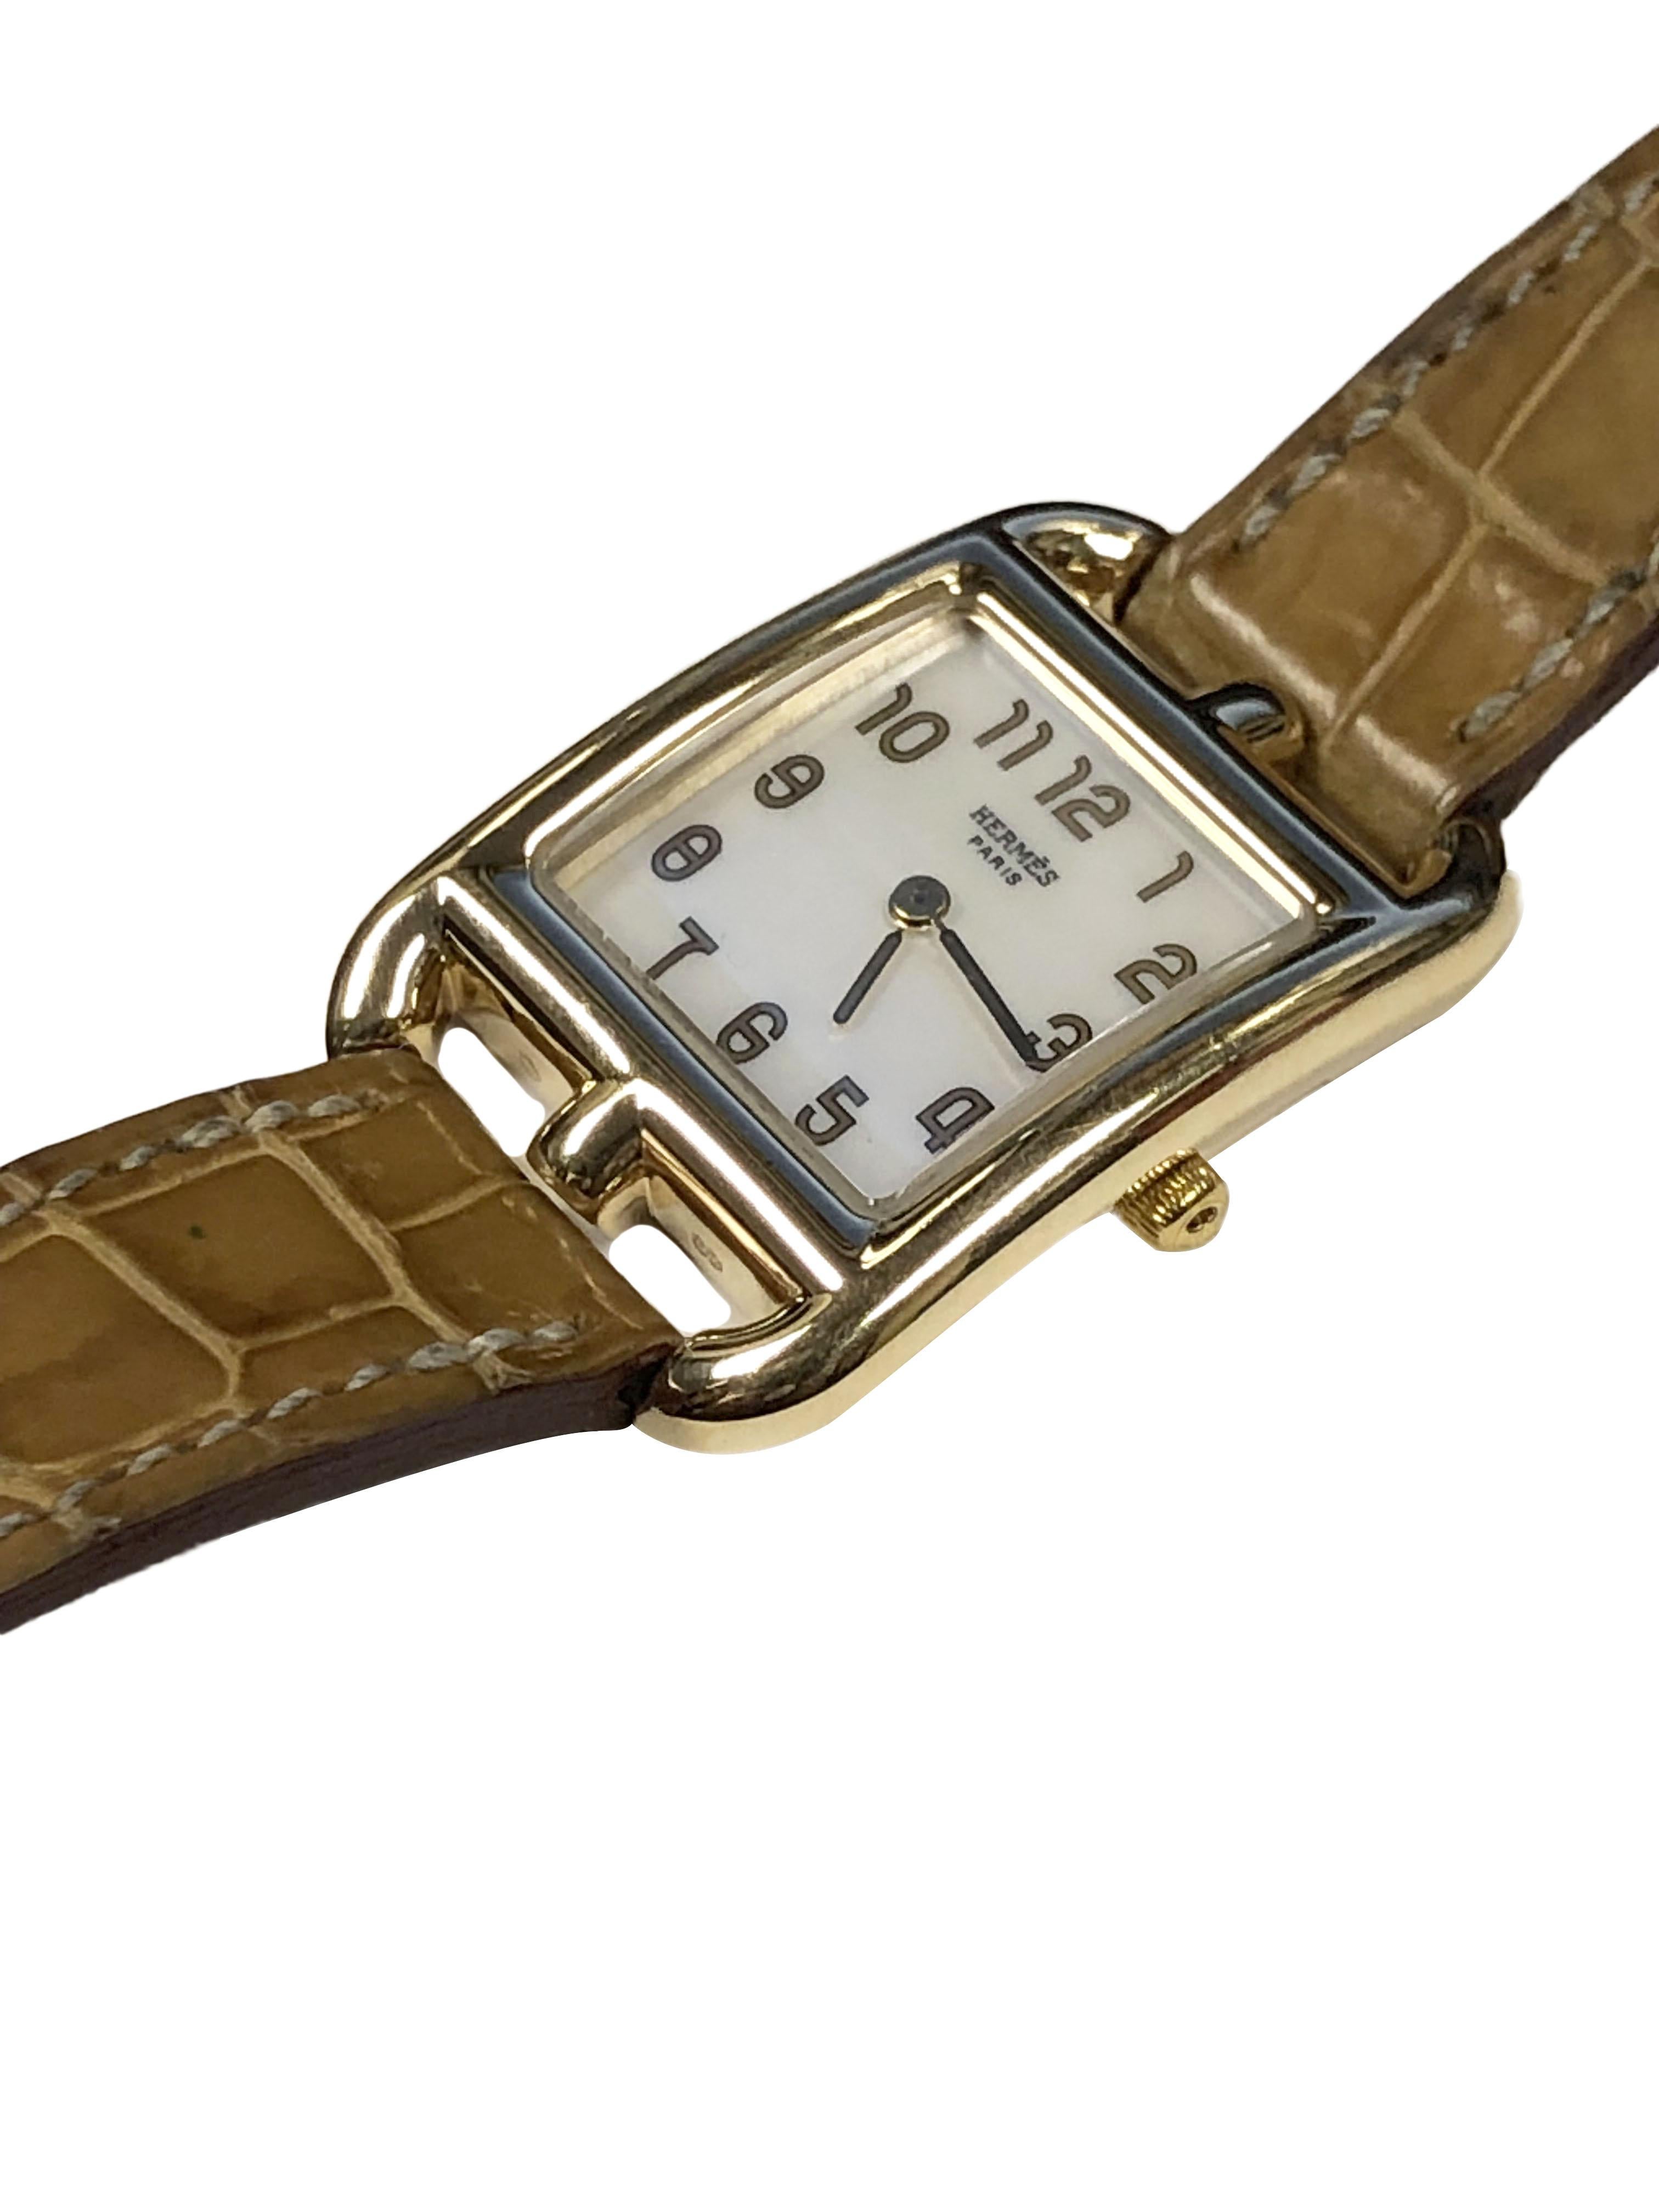 Circa 2010 Hermes Ref: CC1.285 Cape Cod collection Ladies Wrist Watch, 33 x 23 M.M. 18k Yellow Gold 2 piece water resistant case. Quartz movement, White Mother of Pearl Dial with Gold numerals. original Hermes Tan Croco strap with 18k Gold buckle.